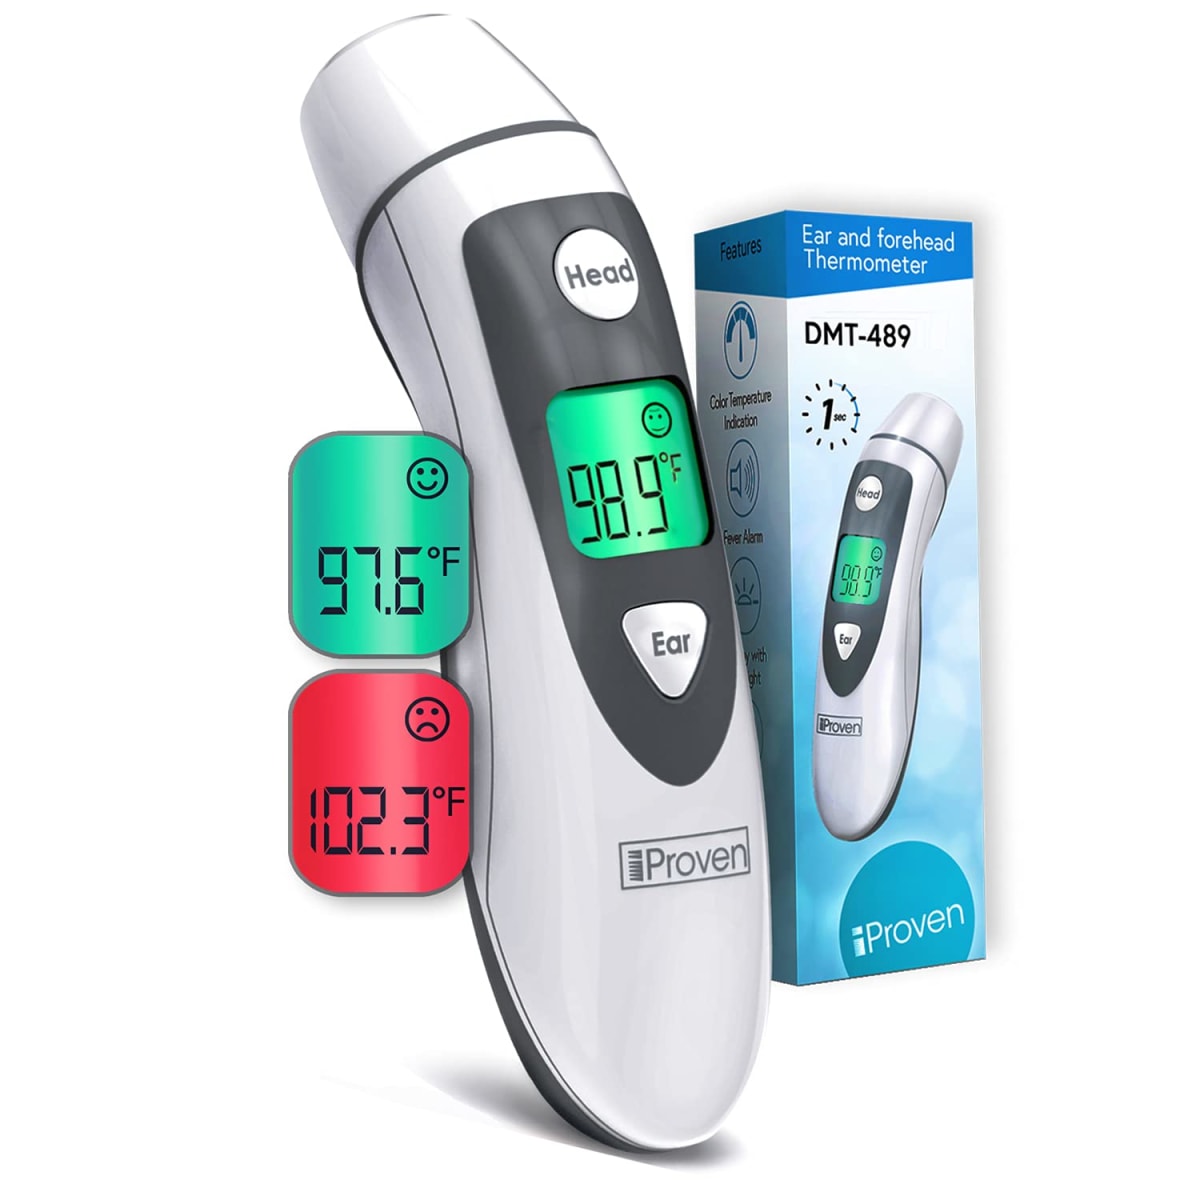 DMT-489 Kids and Babies Thermometer